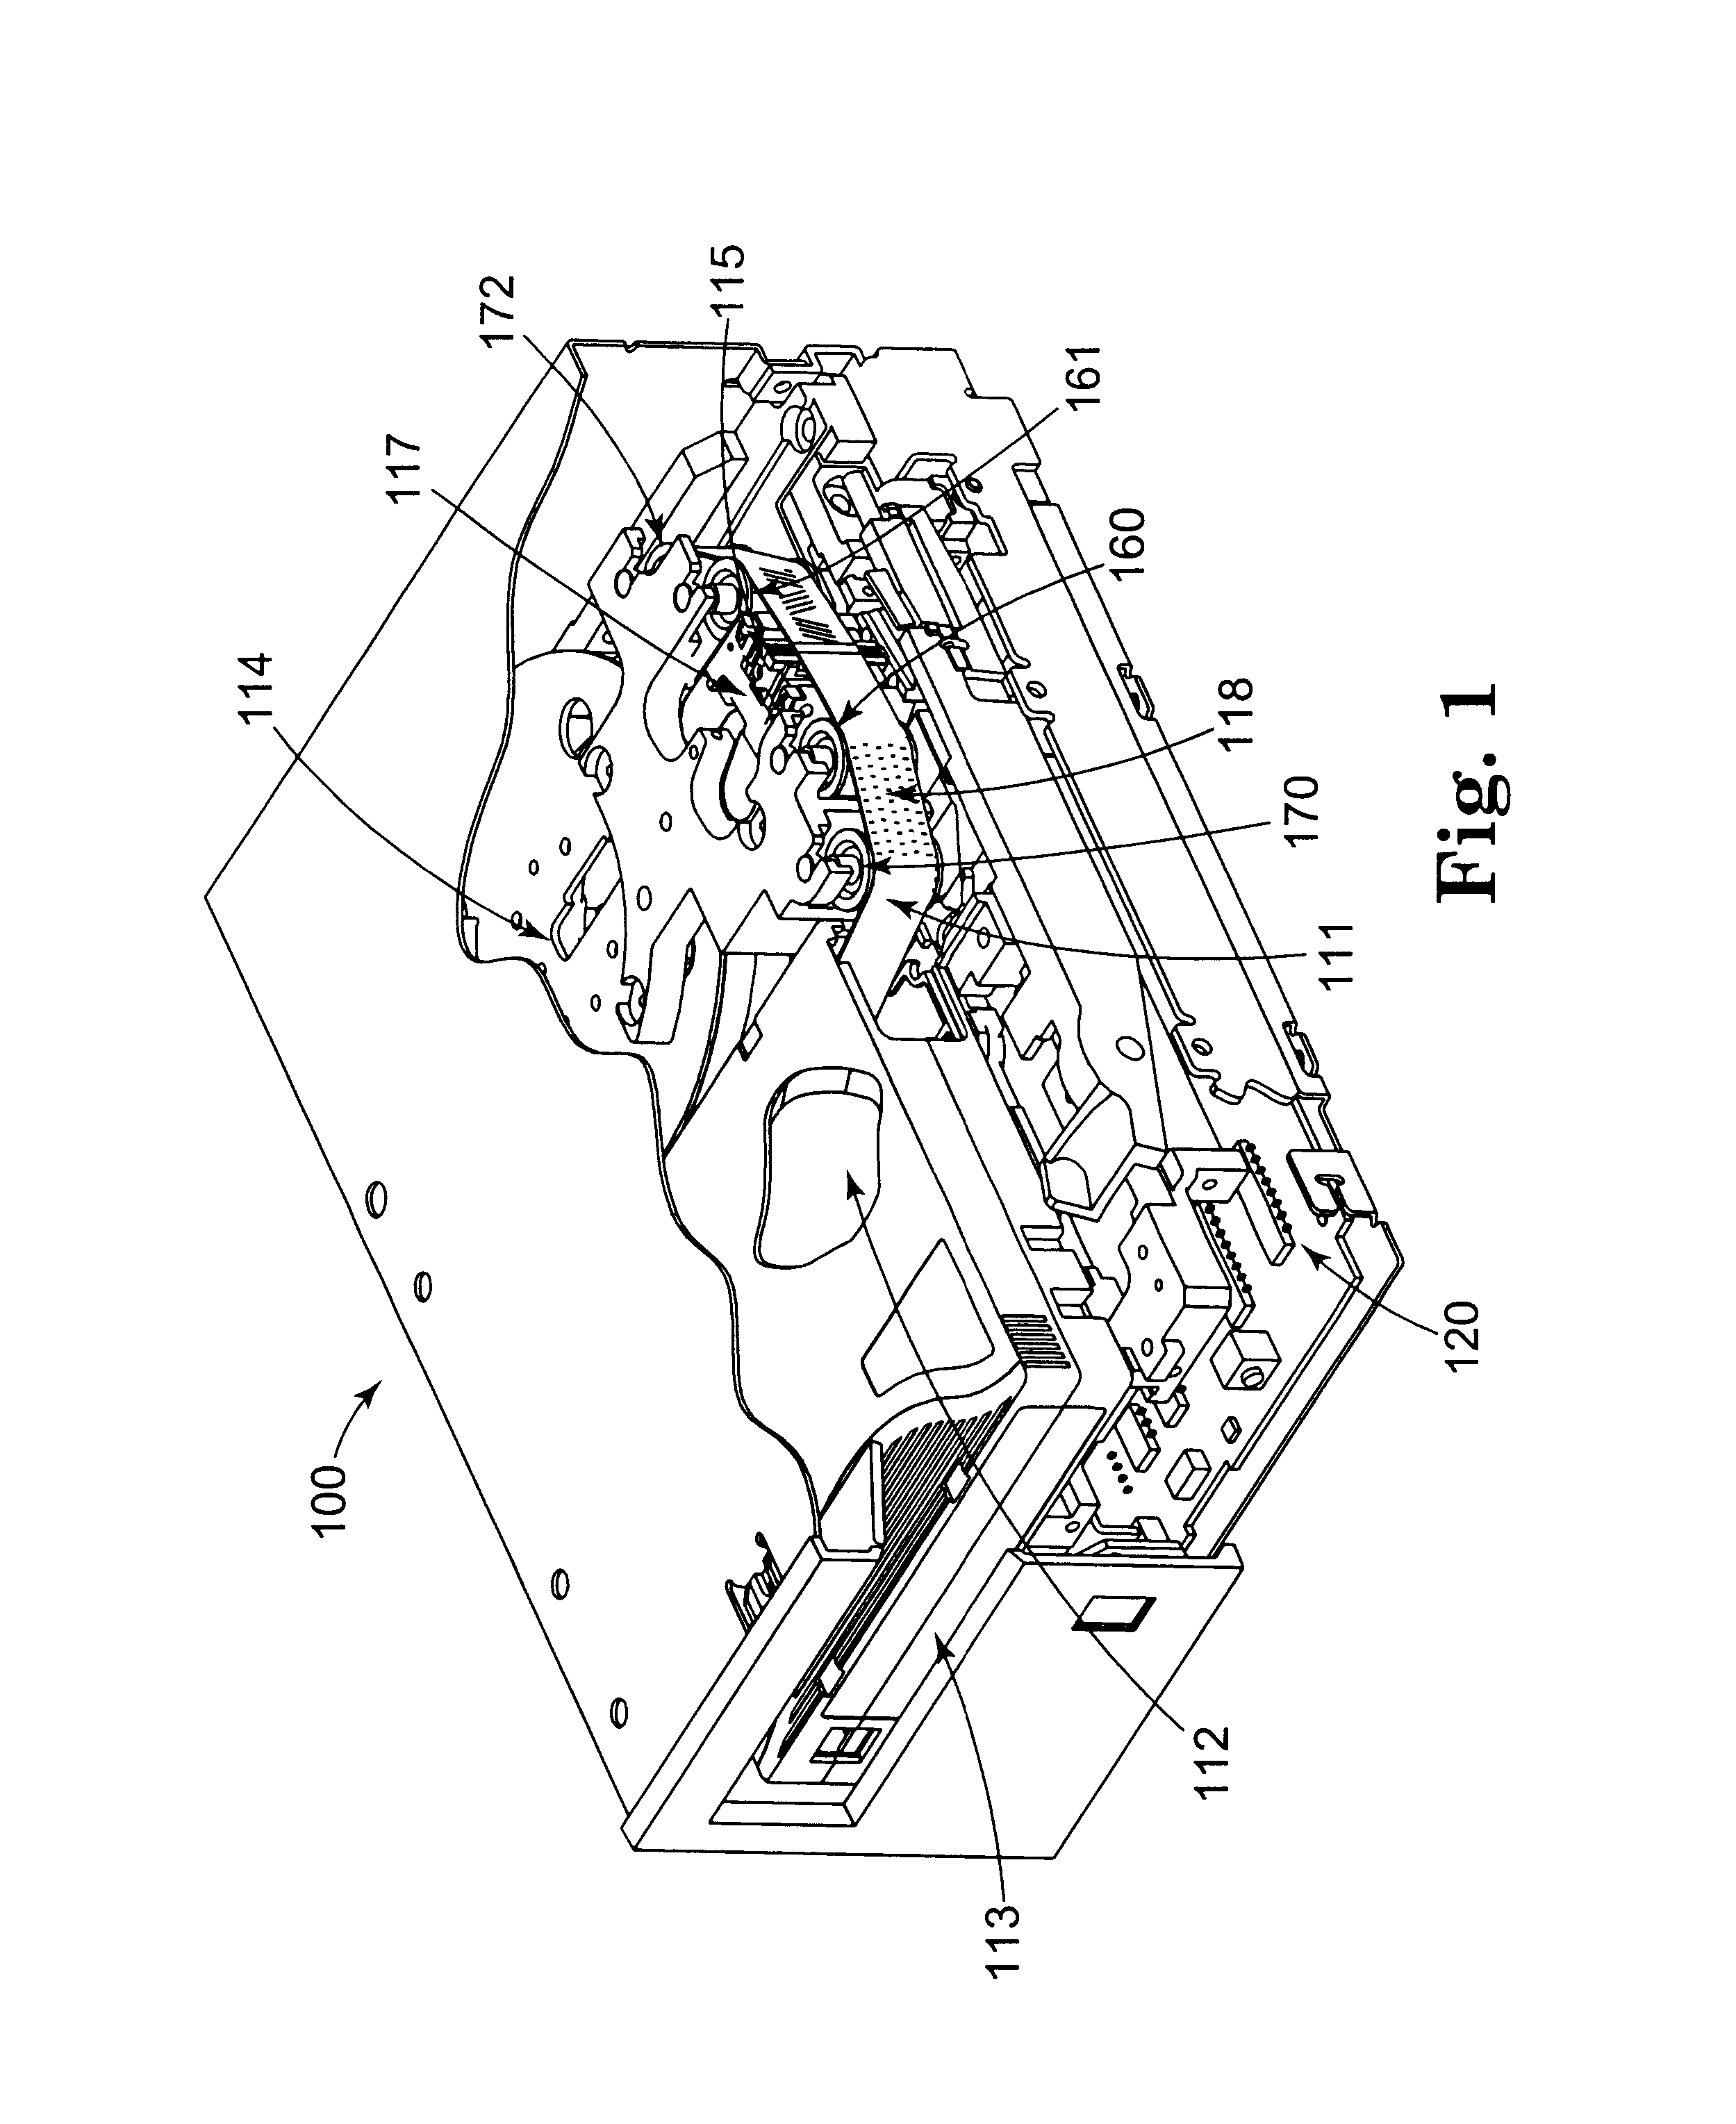 Method and apparatus for compensating for media shift due to tape guide